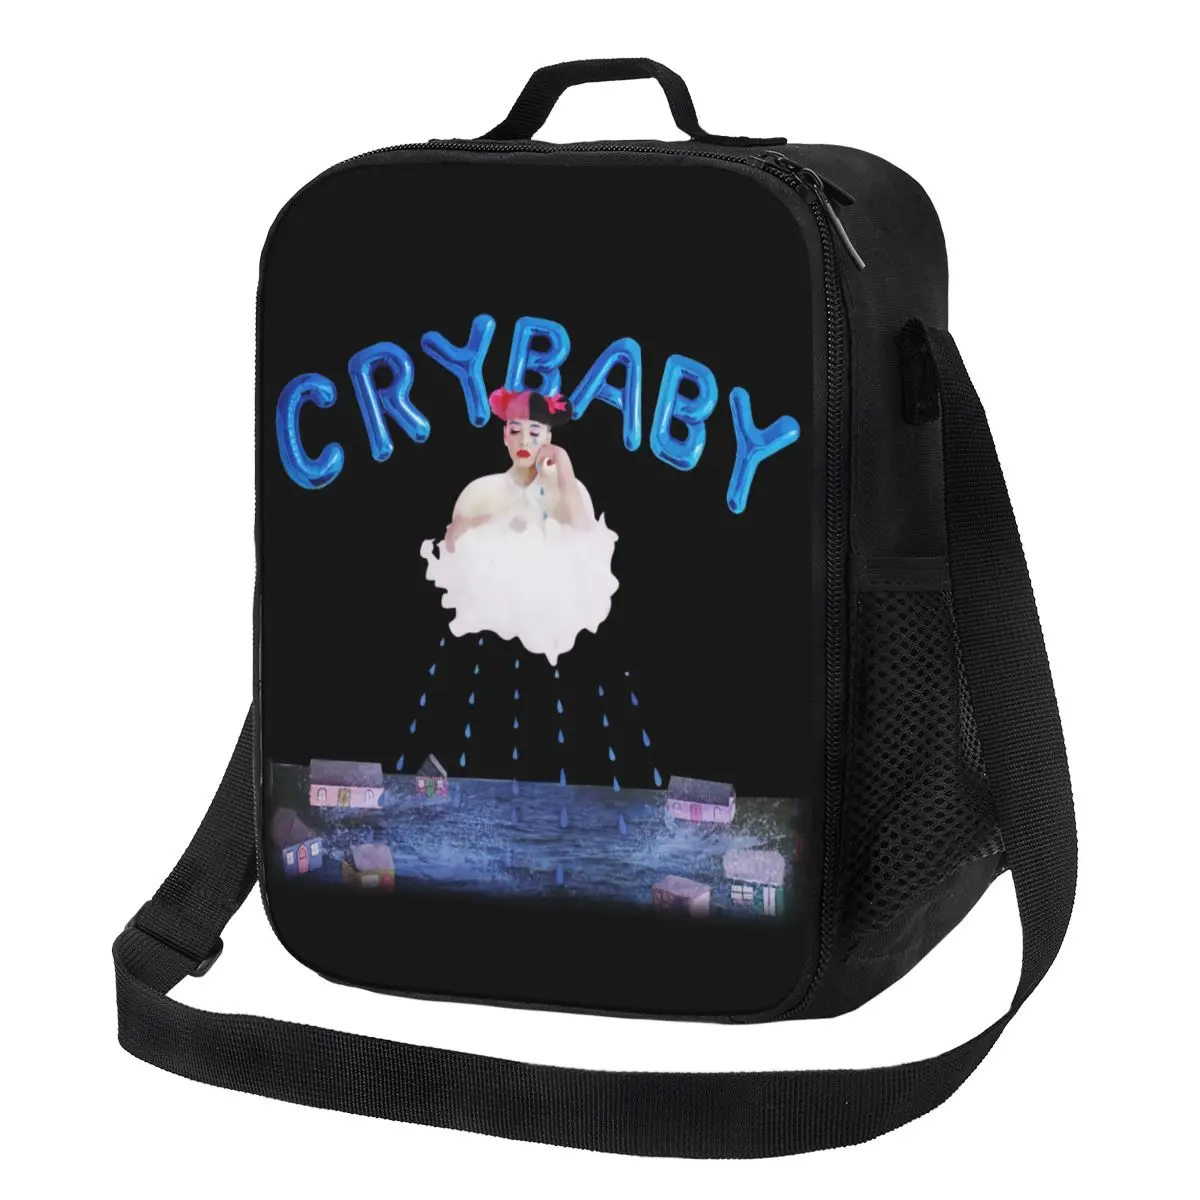 

Melanie Martinez Lunch Bag with Handle Crybaby Cute Cooler Bag Clutch Beach Pearl Cotton Thermal Bag